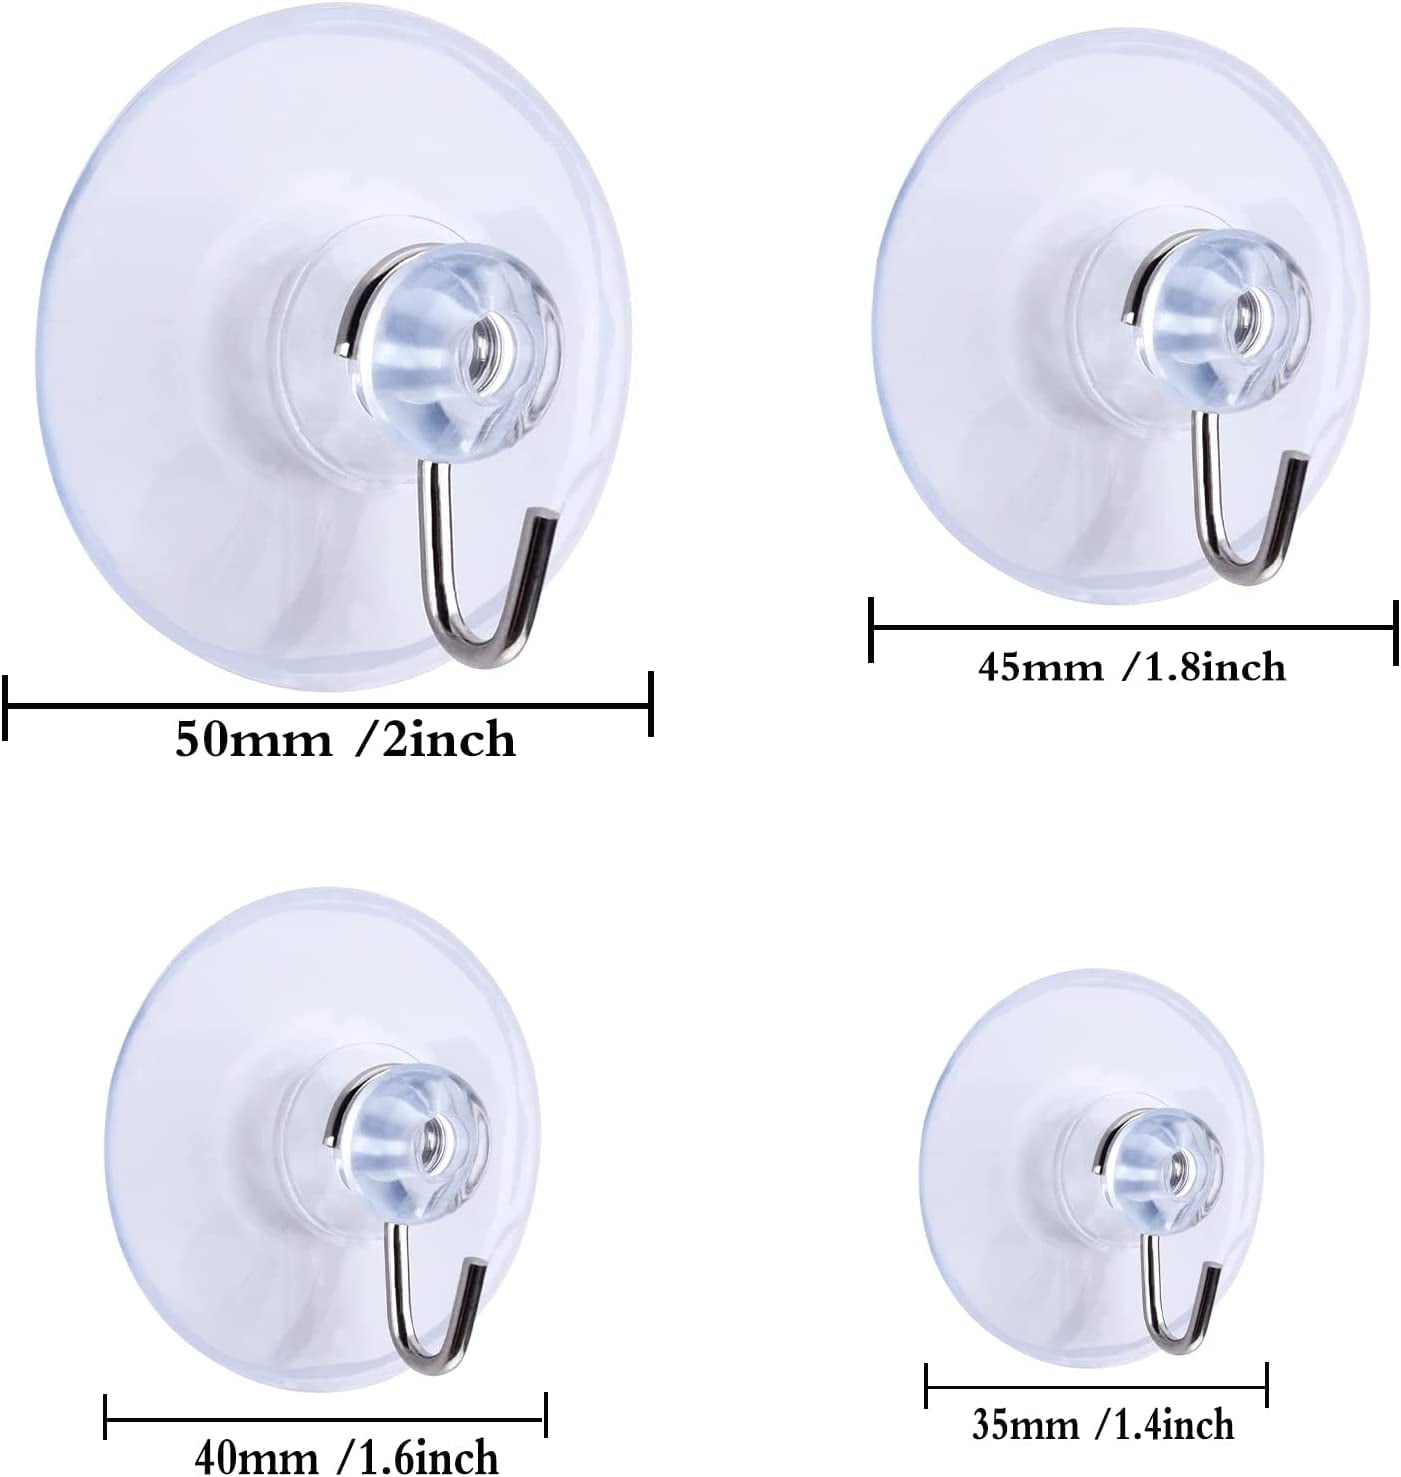 4 pcs kitchen suction hangers suction cup hooks for shower shower wall hooks